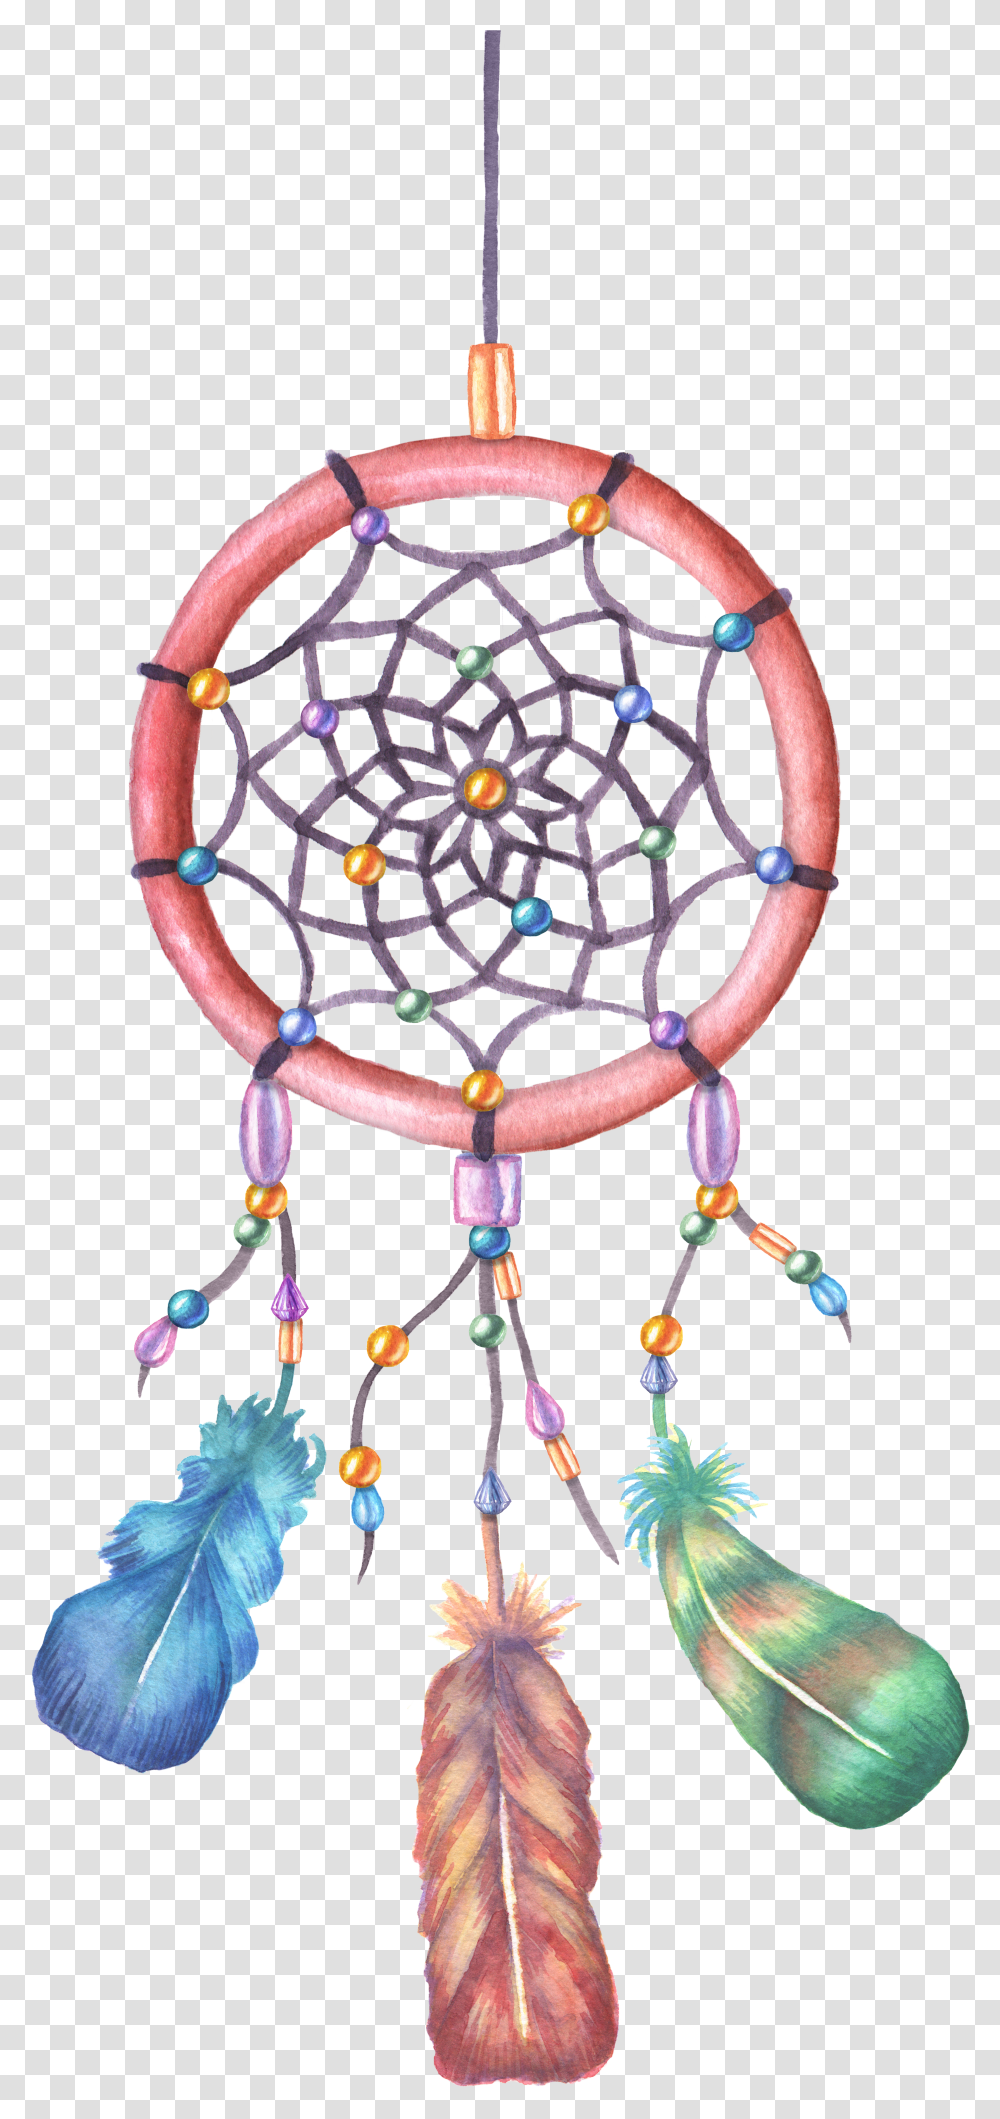 Download Dreamcatcher Illustration Watercolor Painting Red Transparent Png